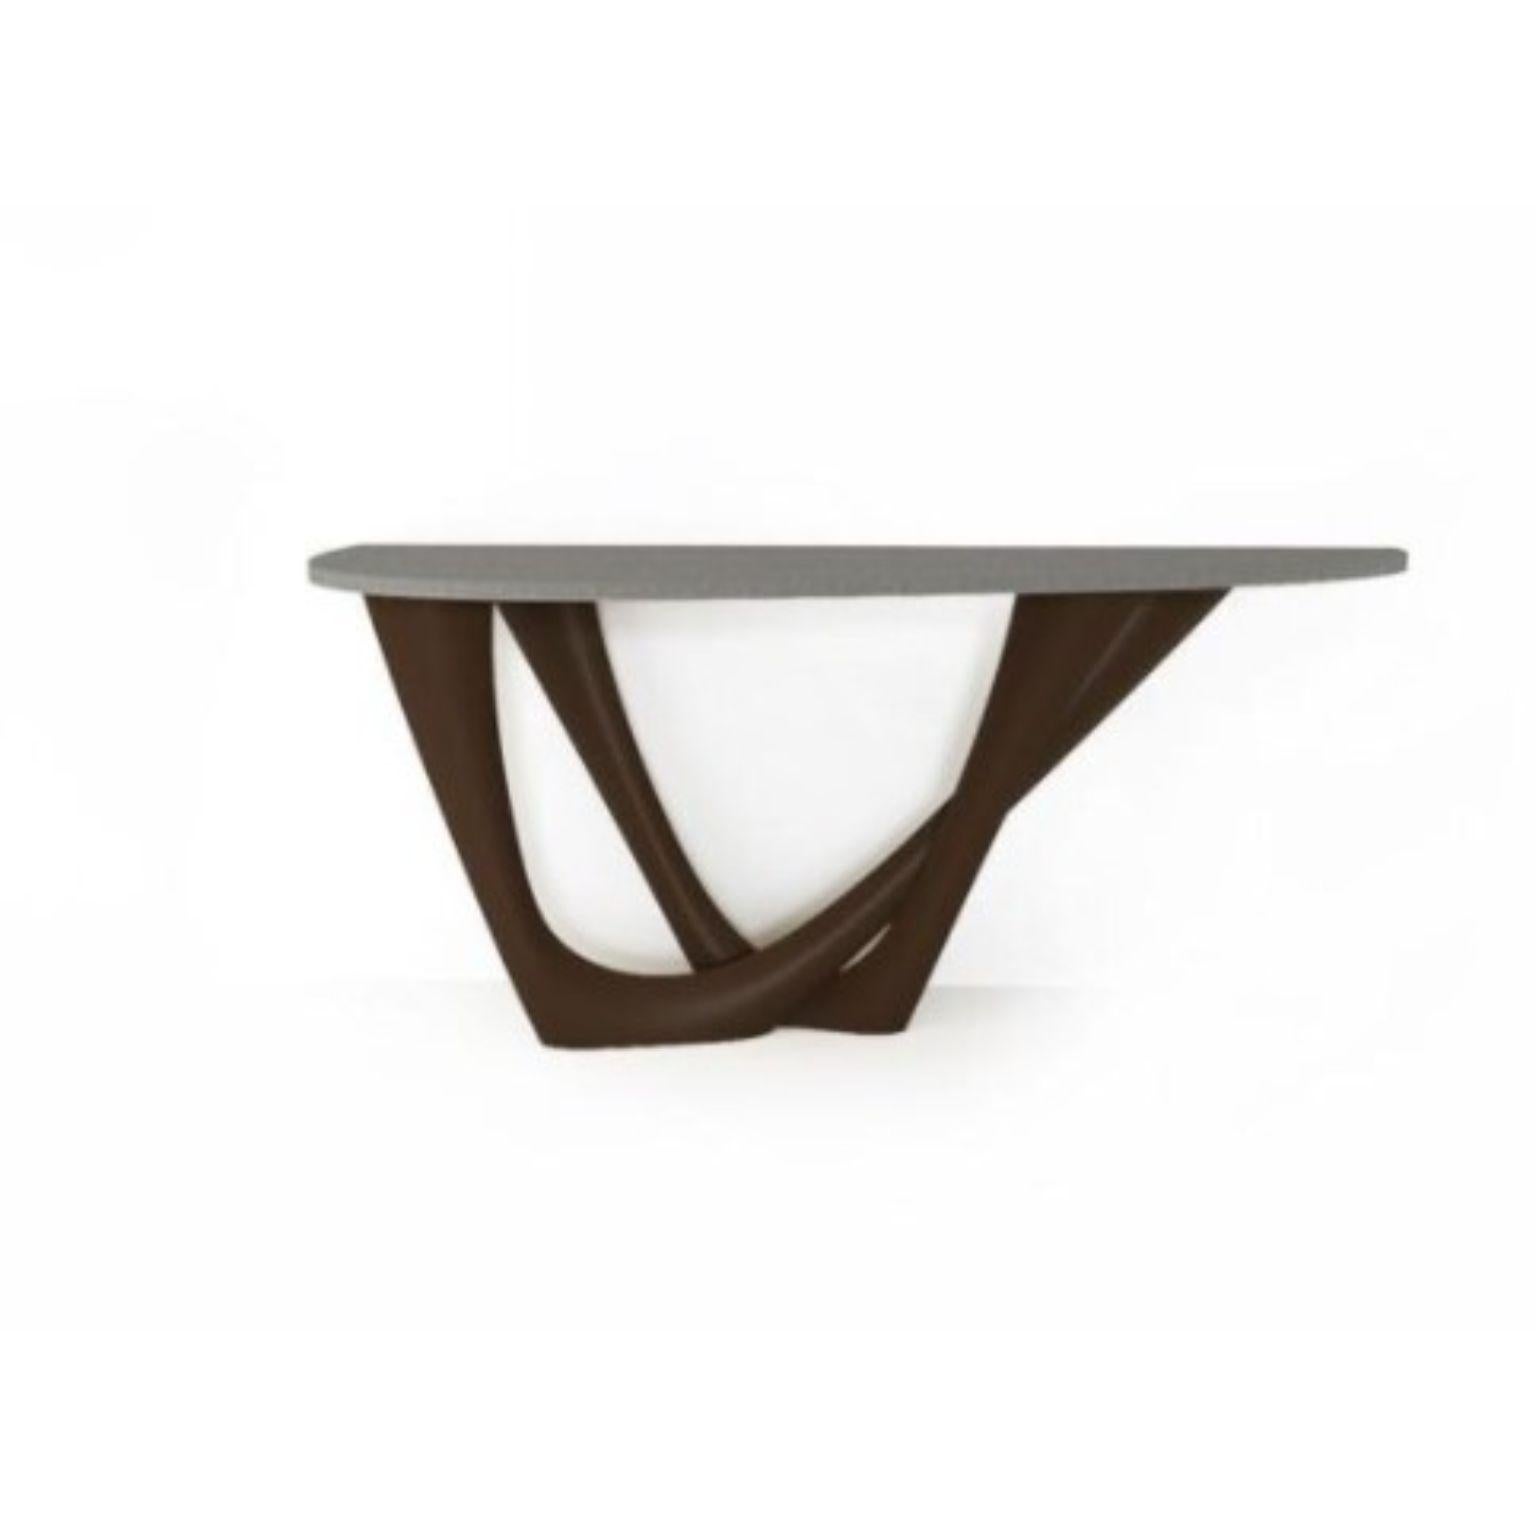 Brown G-console duo concrete top and steel base by Zieta
Dimensions: D 56 x W 168 x H 75 cm 
Material: Carbon steel, concrete.
Also available in different colors and dimensions.

G-Console is another bionic object in our collection. Created for